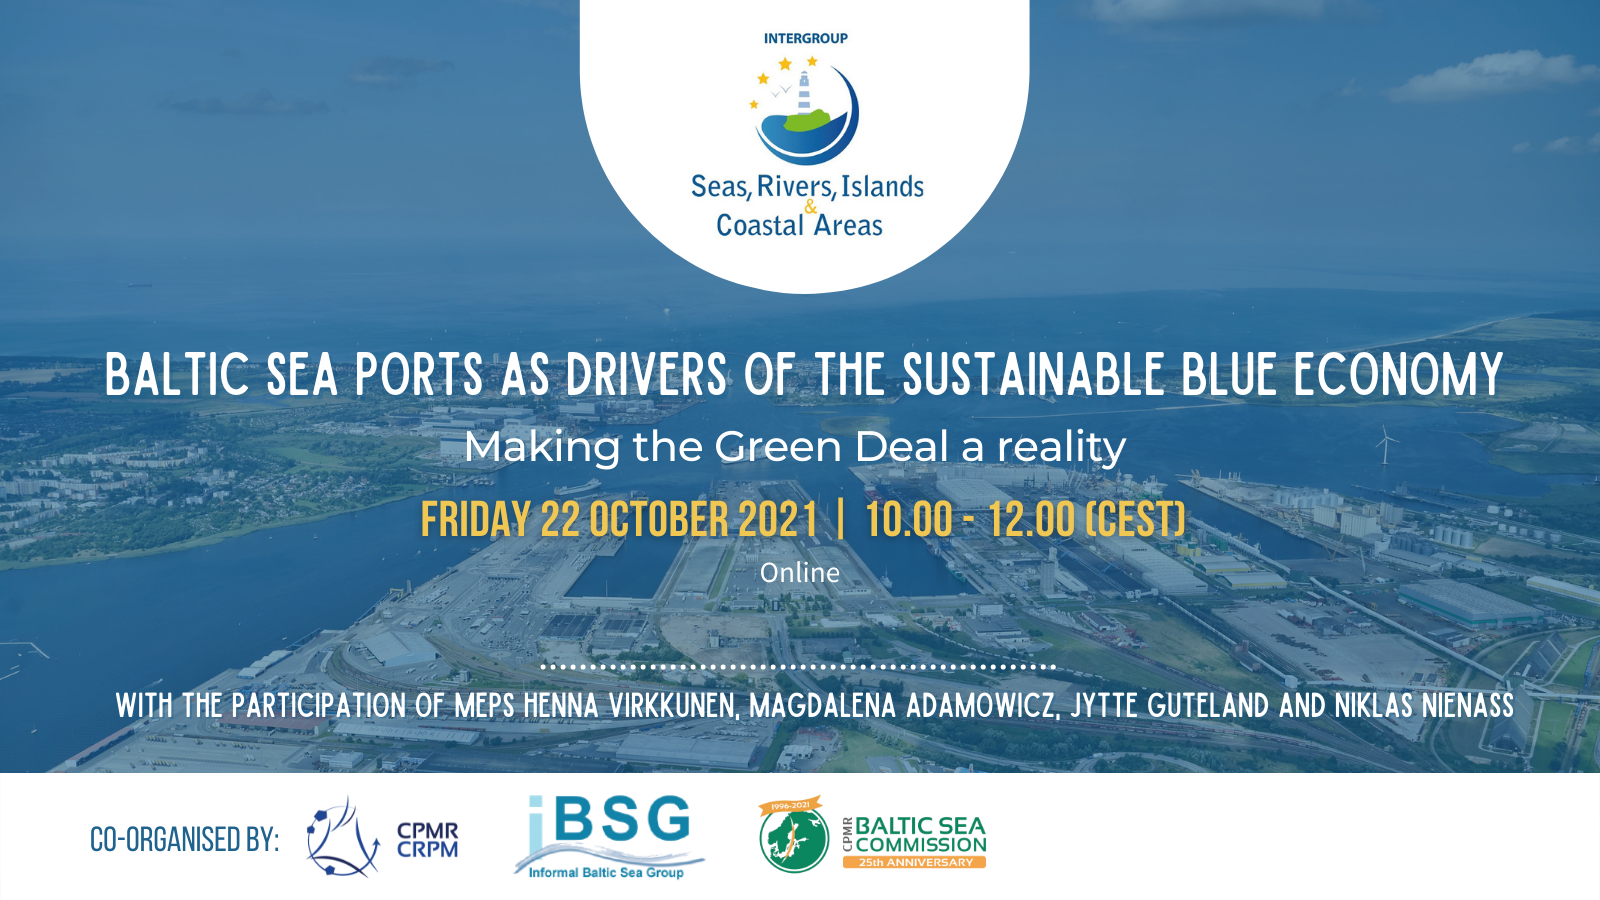 Baltic Sea ports as drivers of the sustainable blue economy